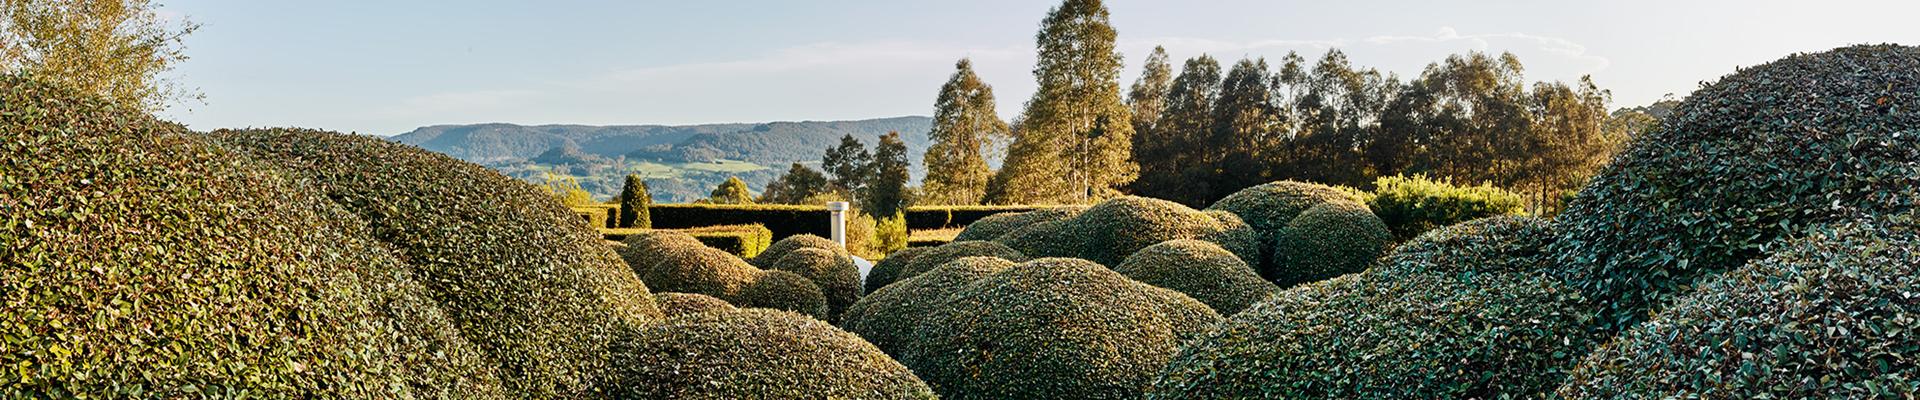 Dome shaped hedges sit in the foreground, with a view of a mountain range in the far distance.